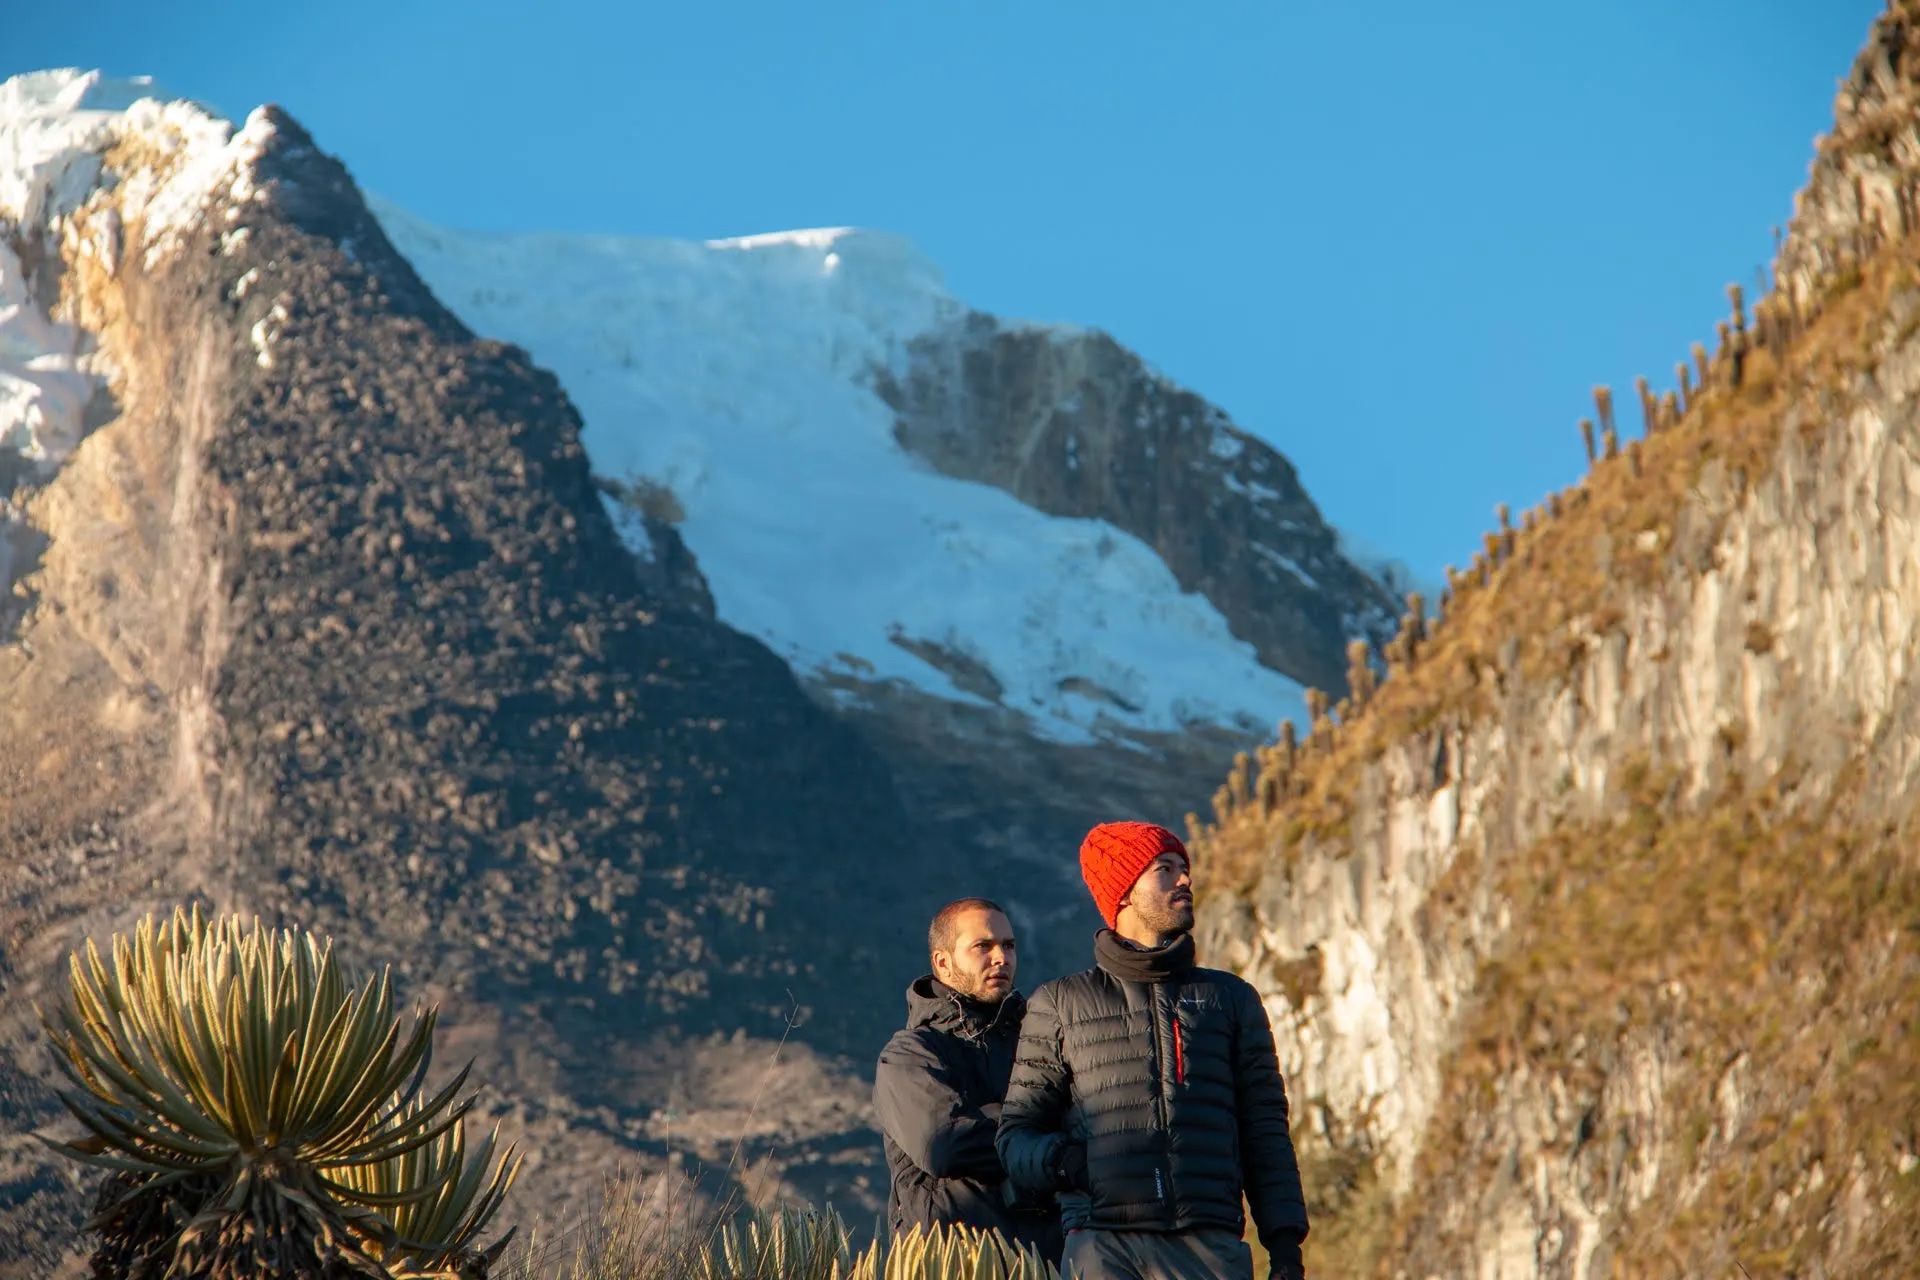 Two hikers in Colombia, the mountains of the Cordillera Central behind them